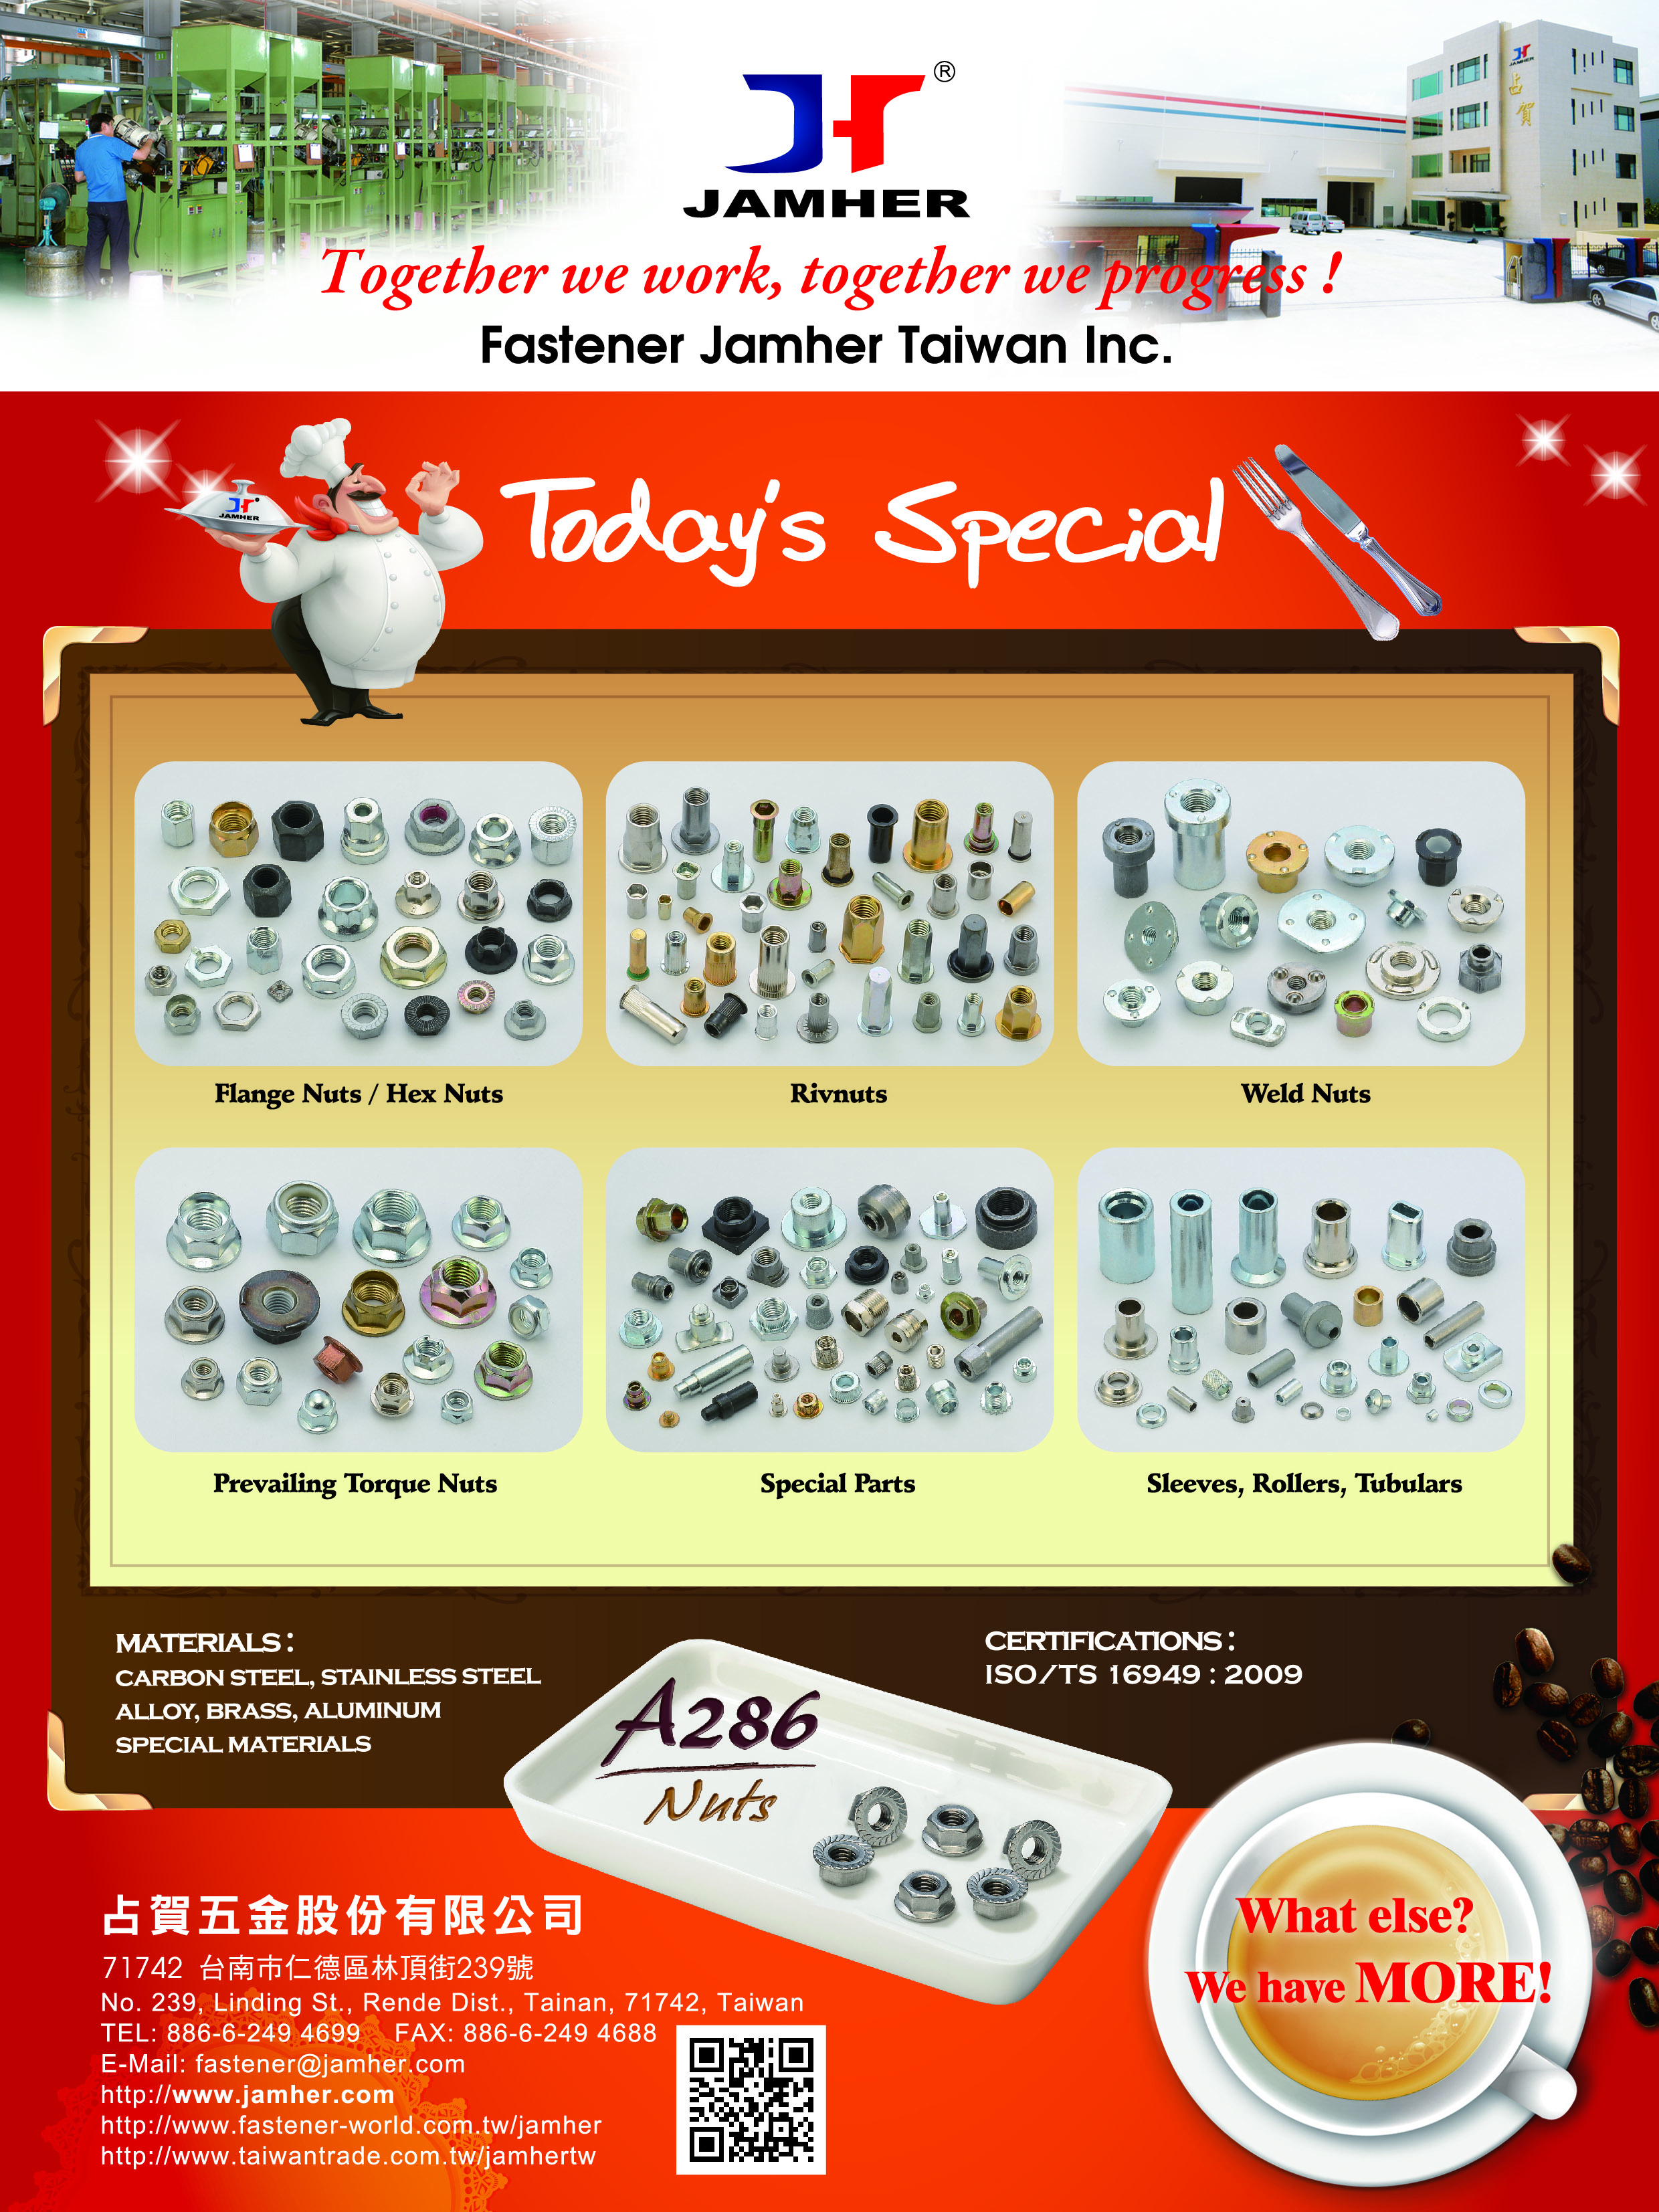 FASTENER JAMHER TAIWAN INC.  Online Catalogues